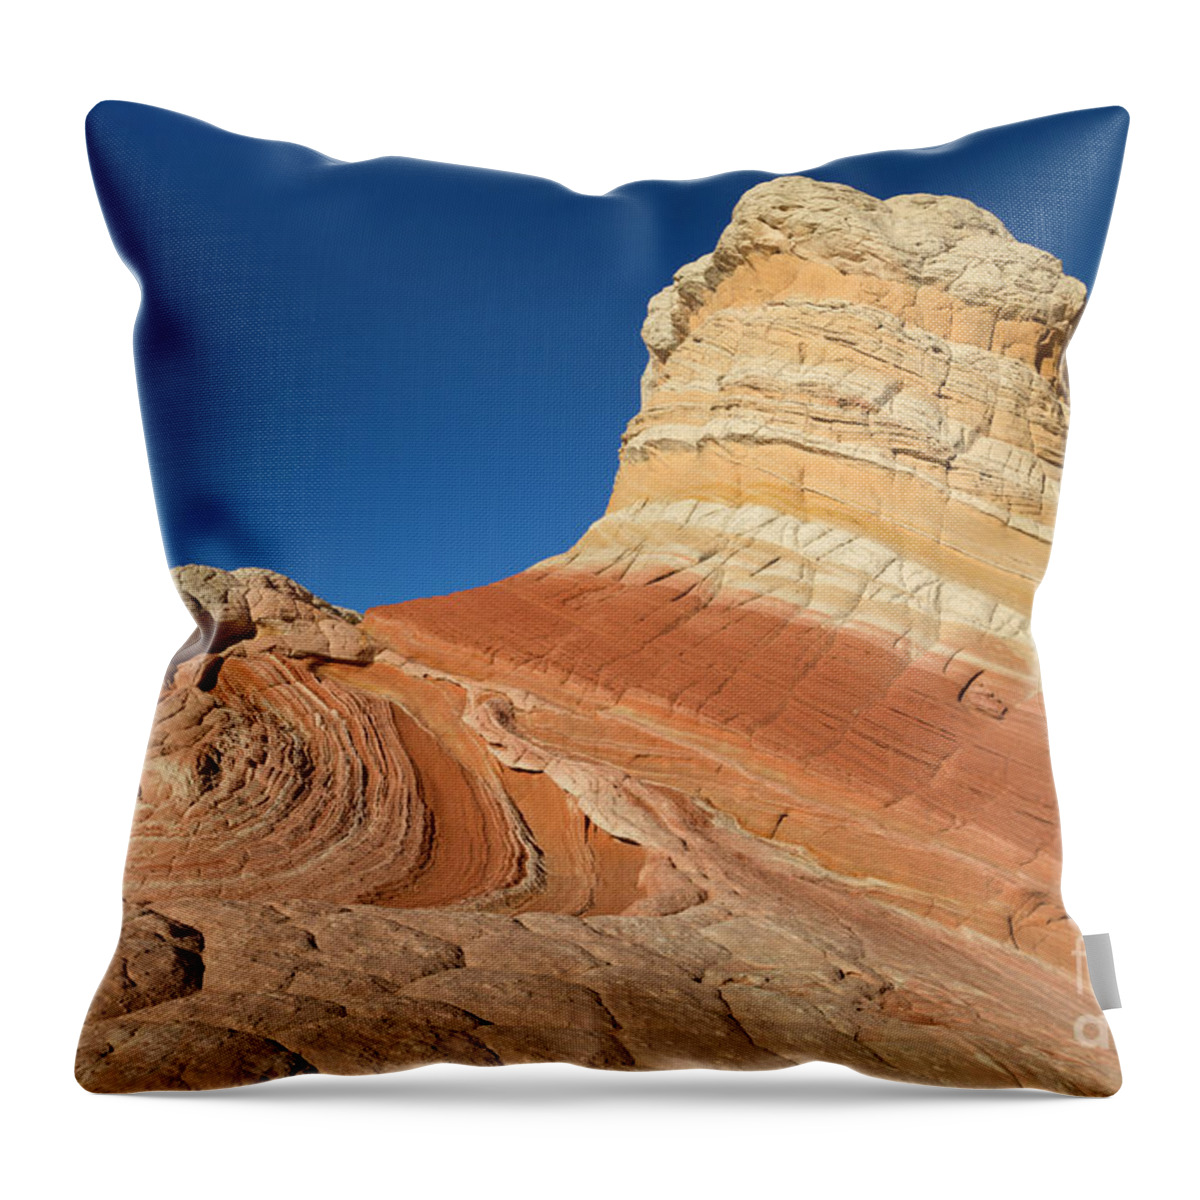 00559280 Throw Pillow featuring the photograph Rock Formation Vermillion Cliffs N M by Yva Momatiuk John Eastcott